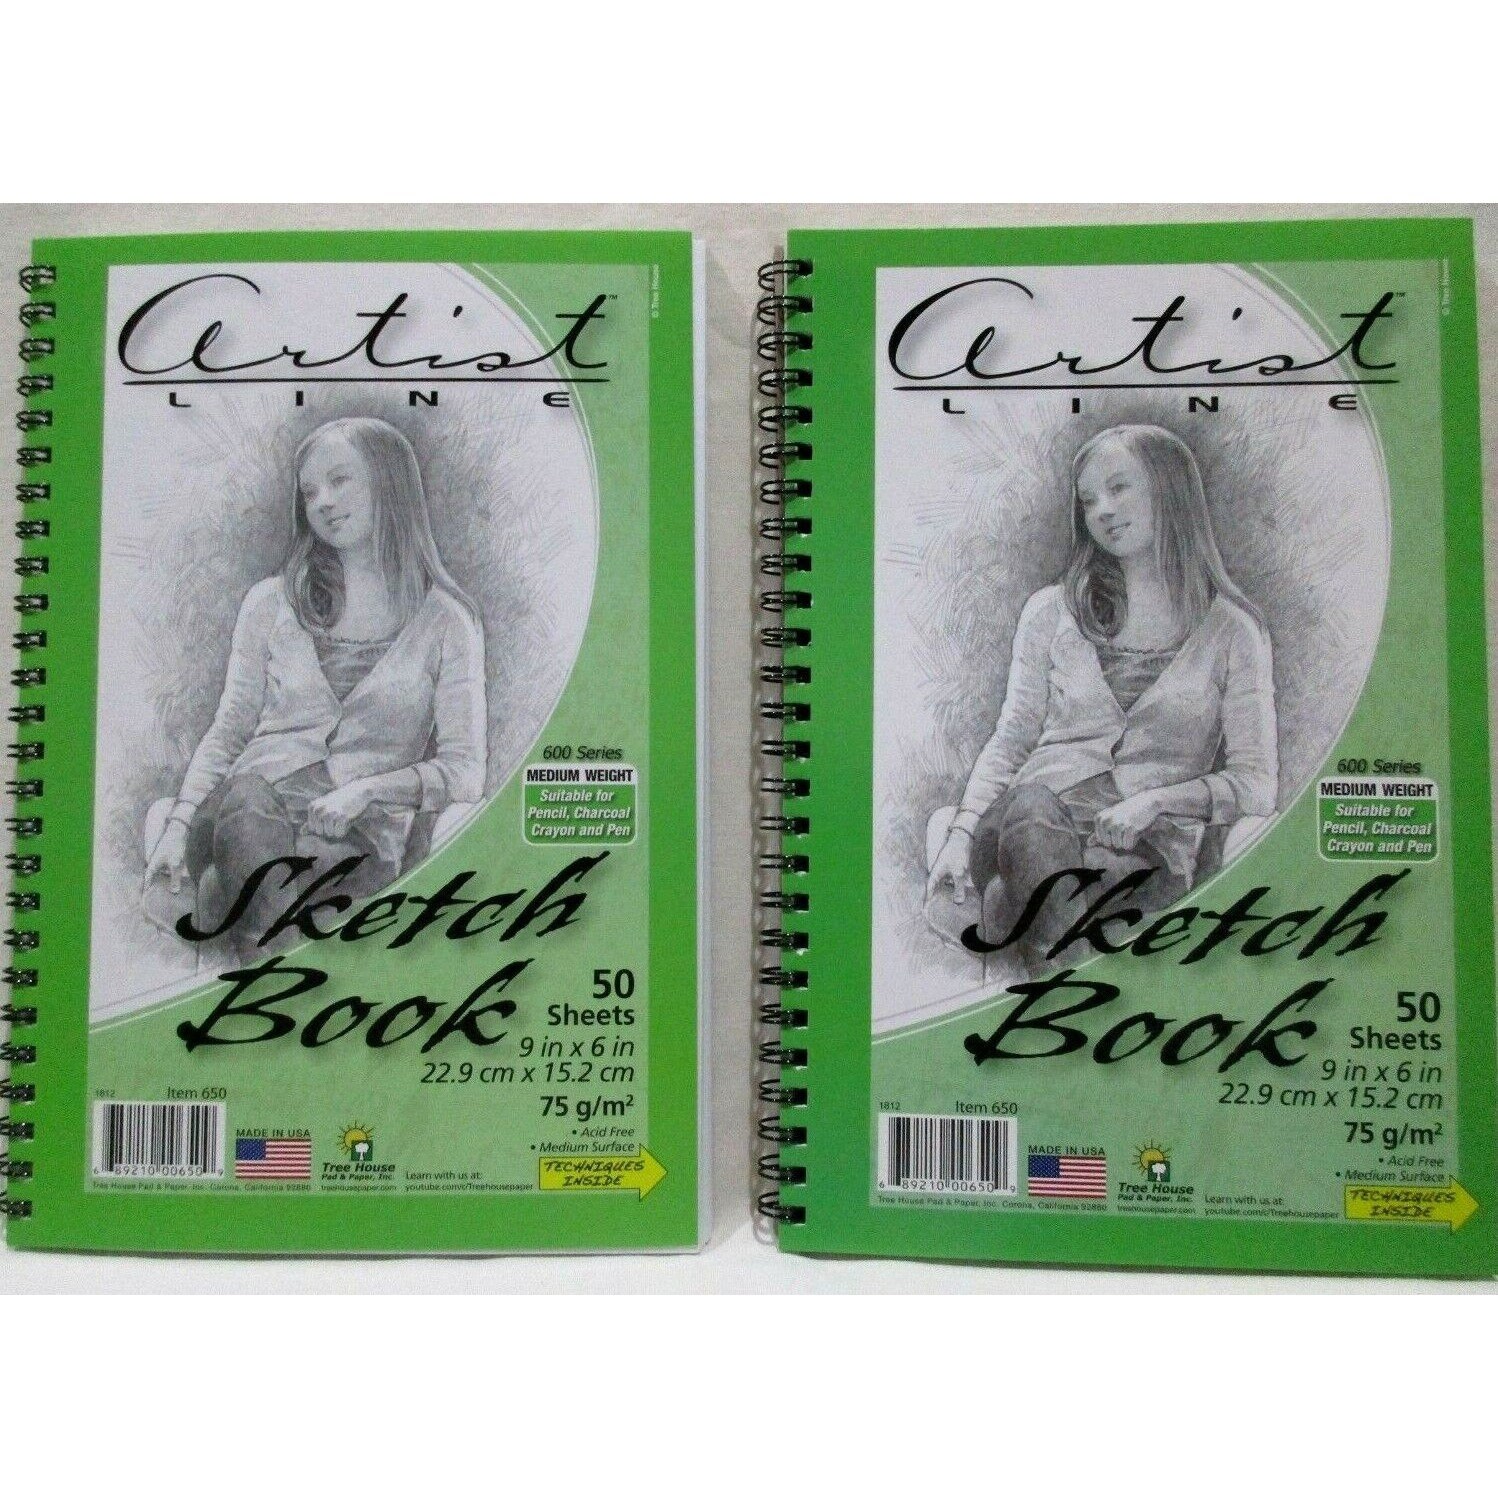 2 Ucreate Artist Sketch Medium Weight Drawing Paper / Sketch Pads / Spiral  Bound Sketch Diary 70 9.5x6 Sheets / Sketch Pad 50 9x12 Sheets 